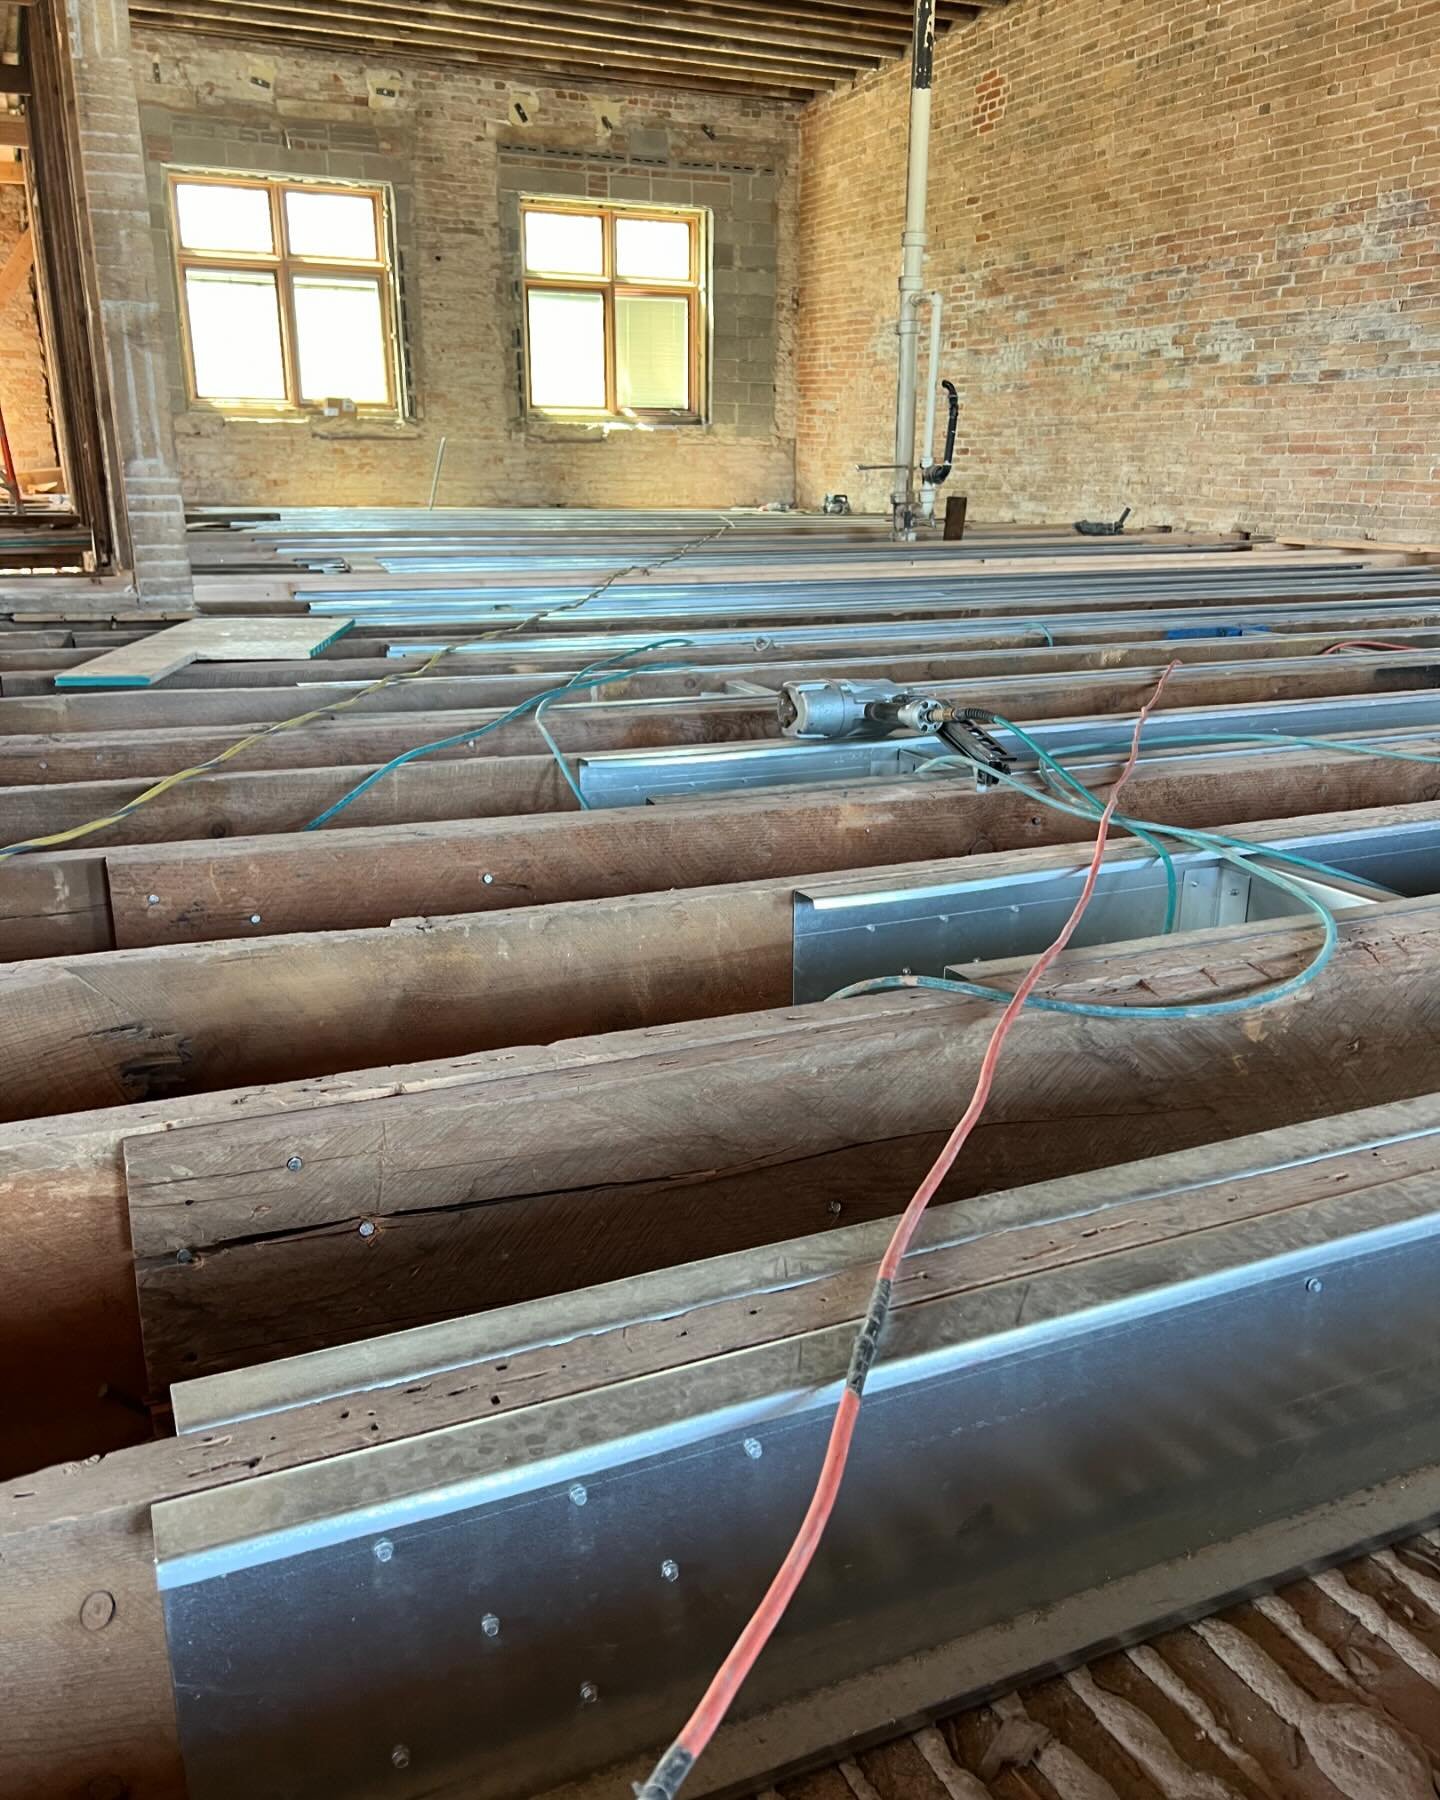 Sister from another mister! We've sistered or replaced a significant number of joists in the Main Street buildings. In an effort to not disturb the original plaster and tin ceiling below 360 Main, the carpenters used metal studs instead of wood. Seem